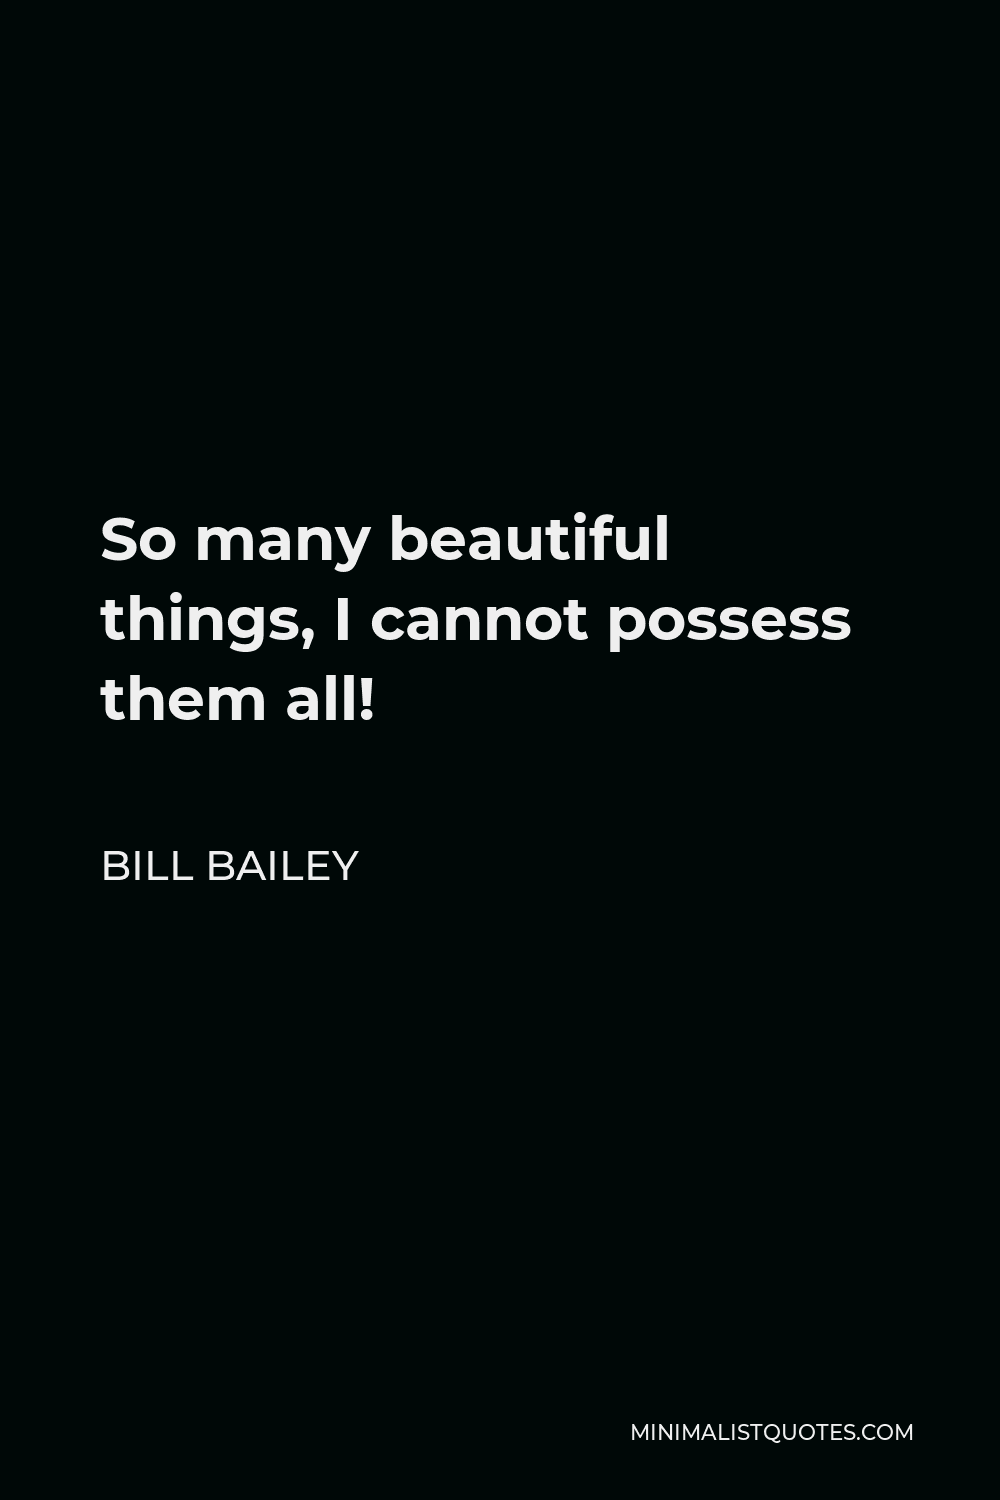 Bill Bailey Quote - So many beautiful things, I cannot possess them all!